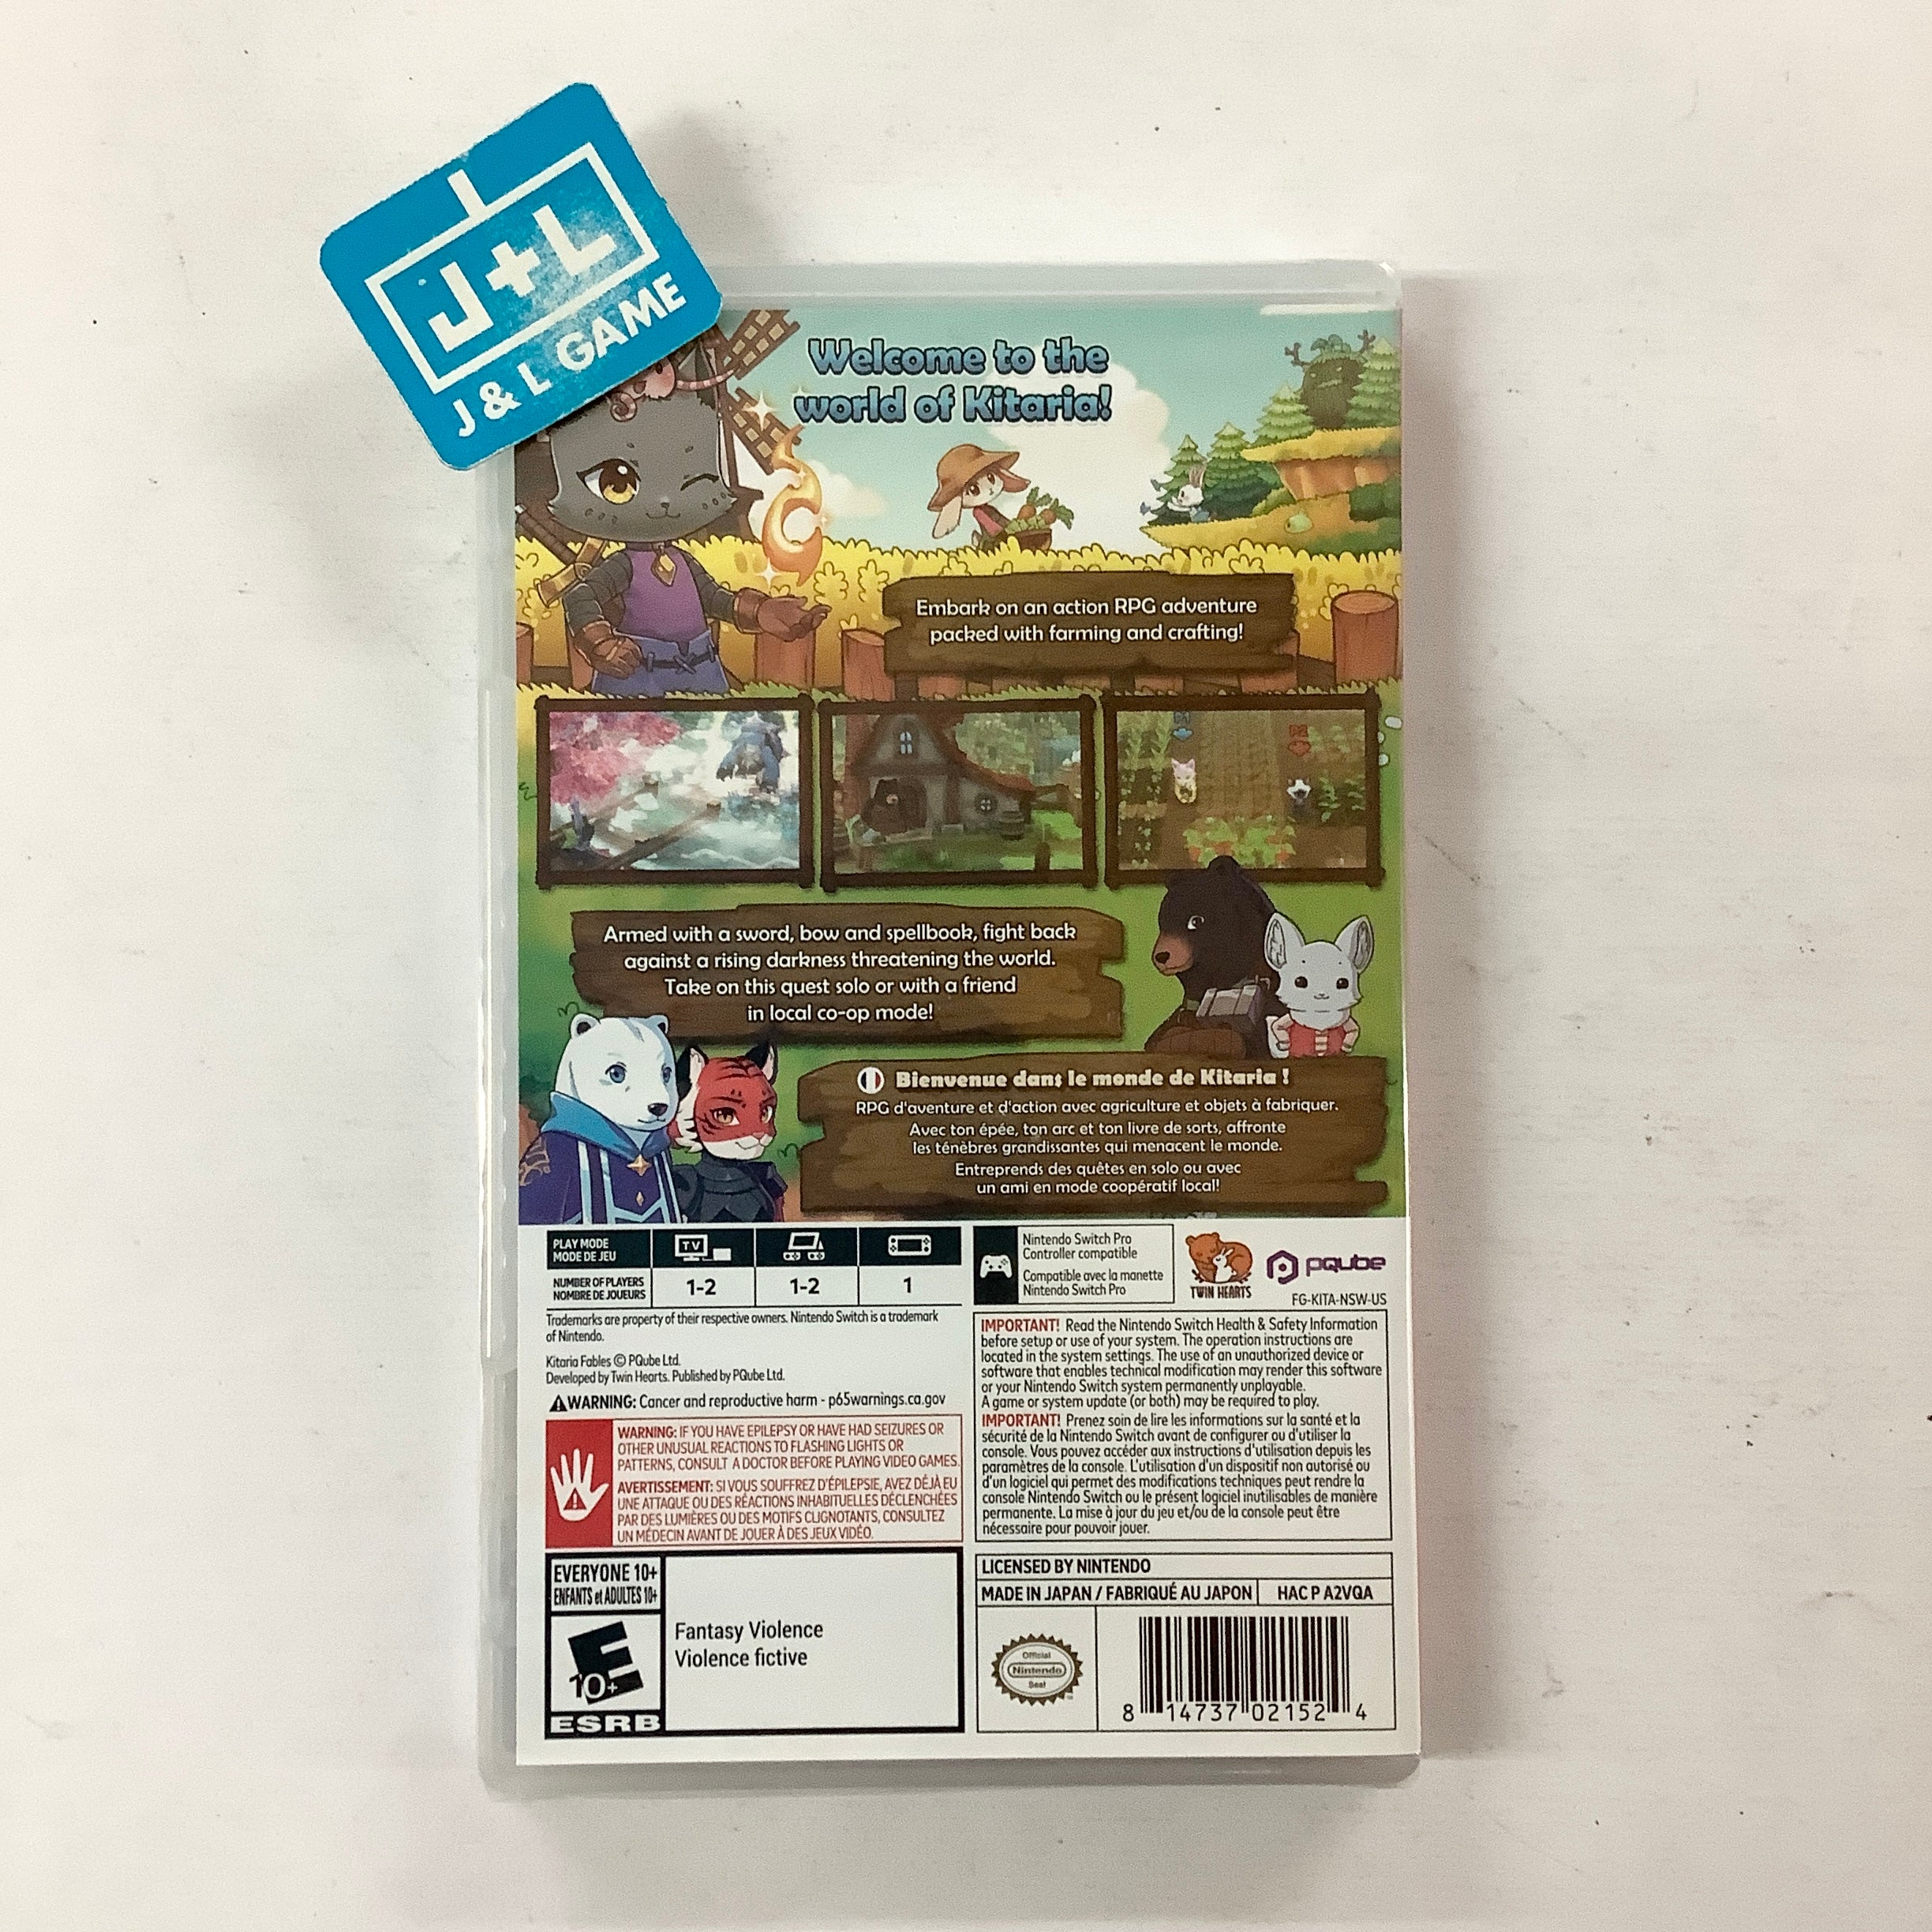 Kitaria Fables - (NSW) Nintendo Switch Video Games PQube   